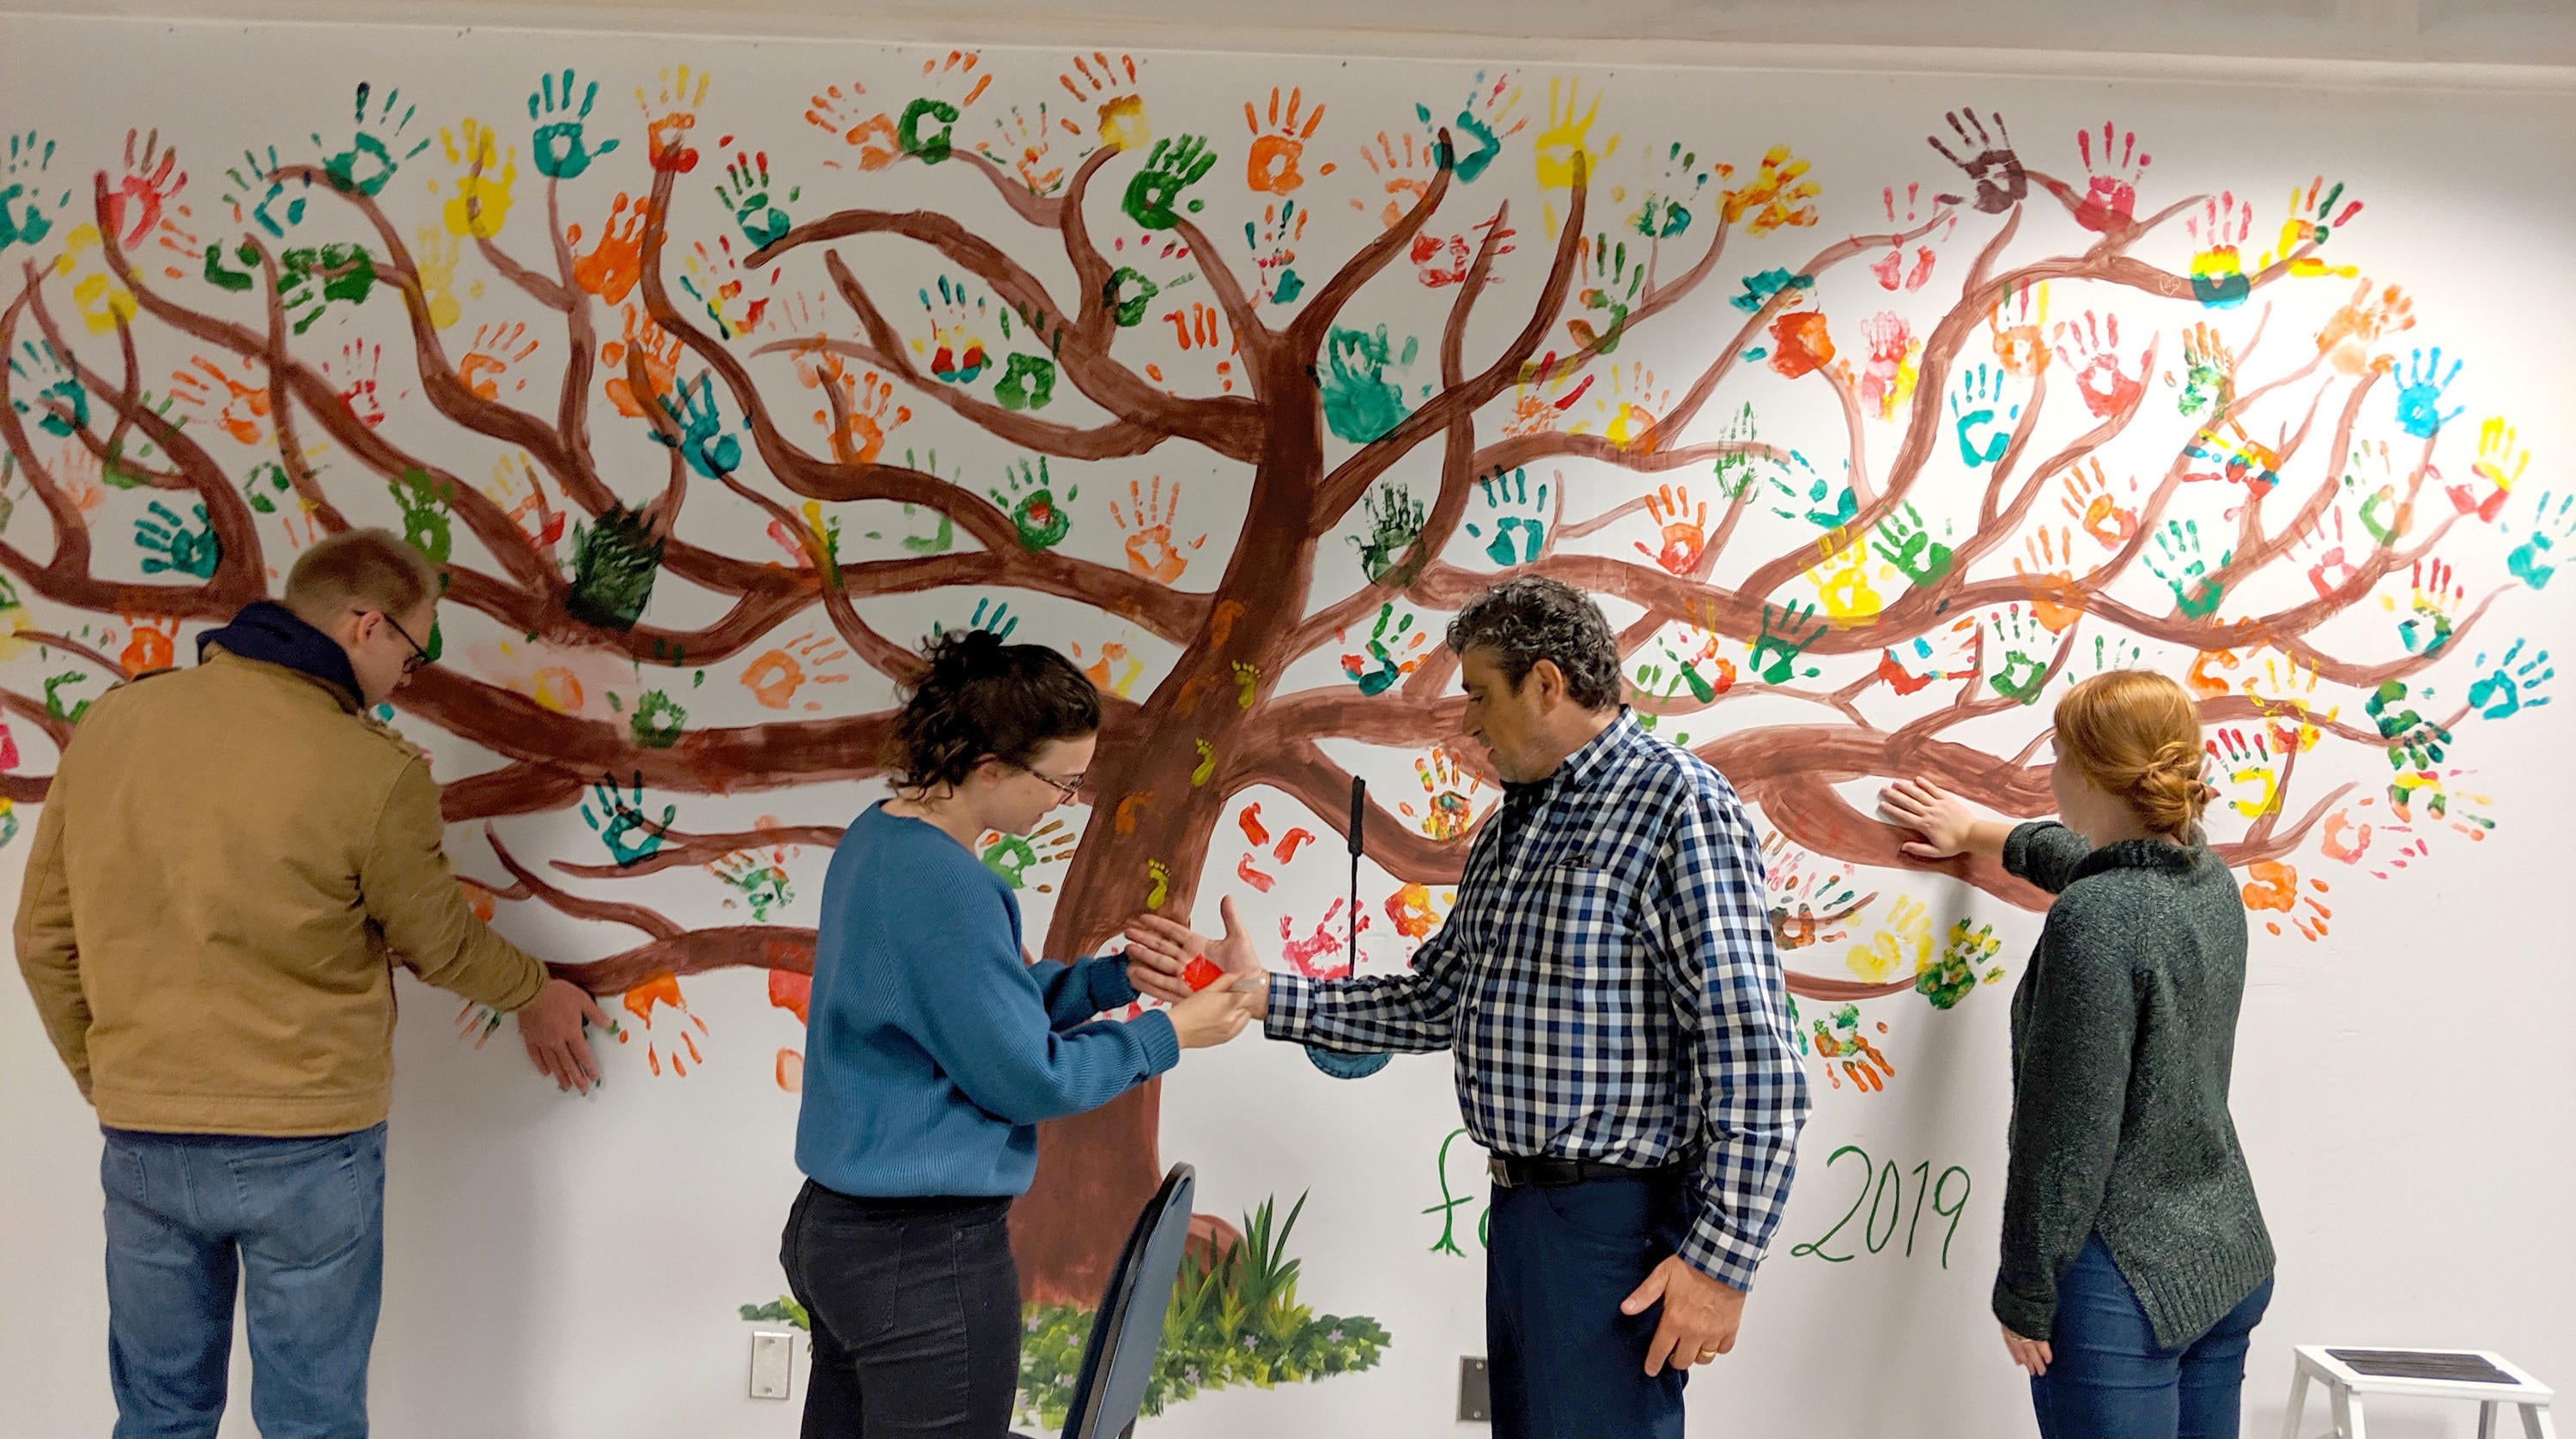 Staff and students adding their handprints to the painted tree in the dining room